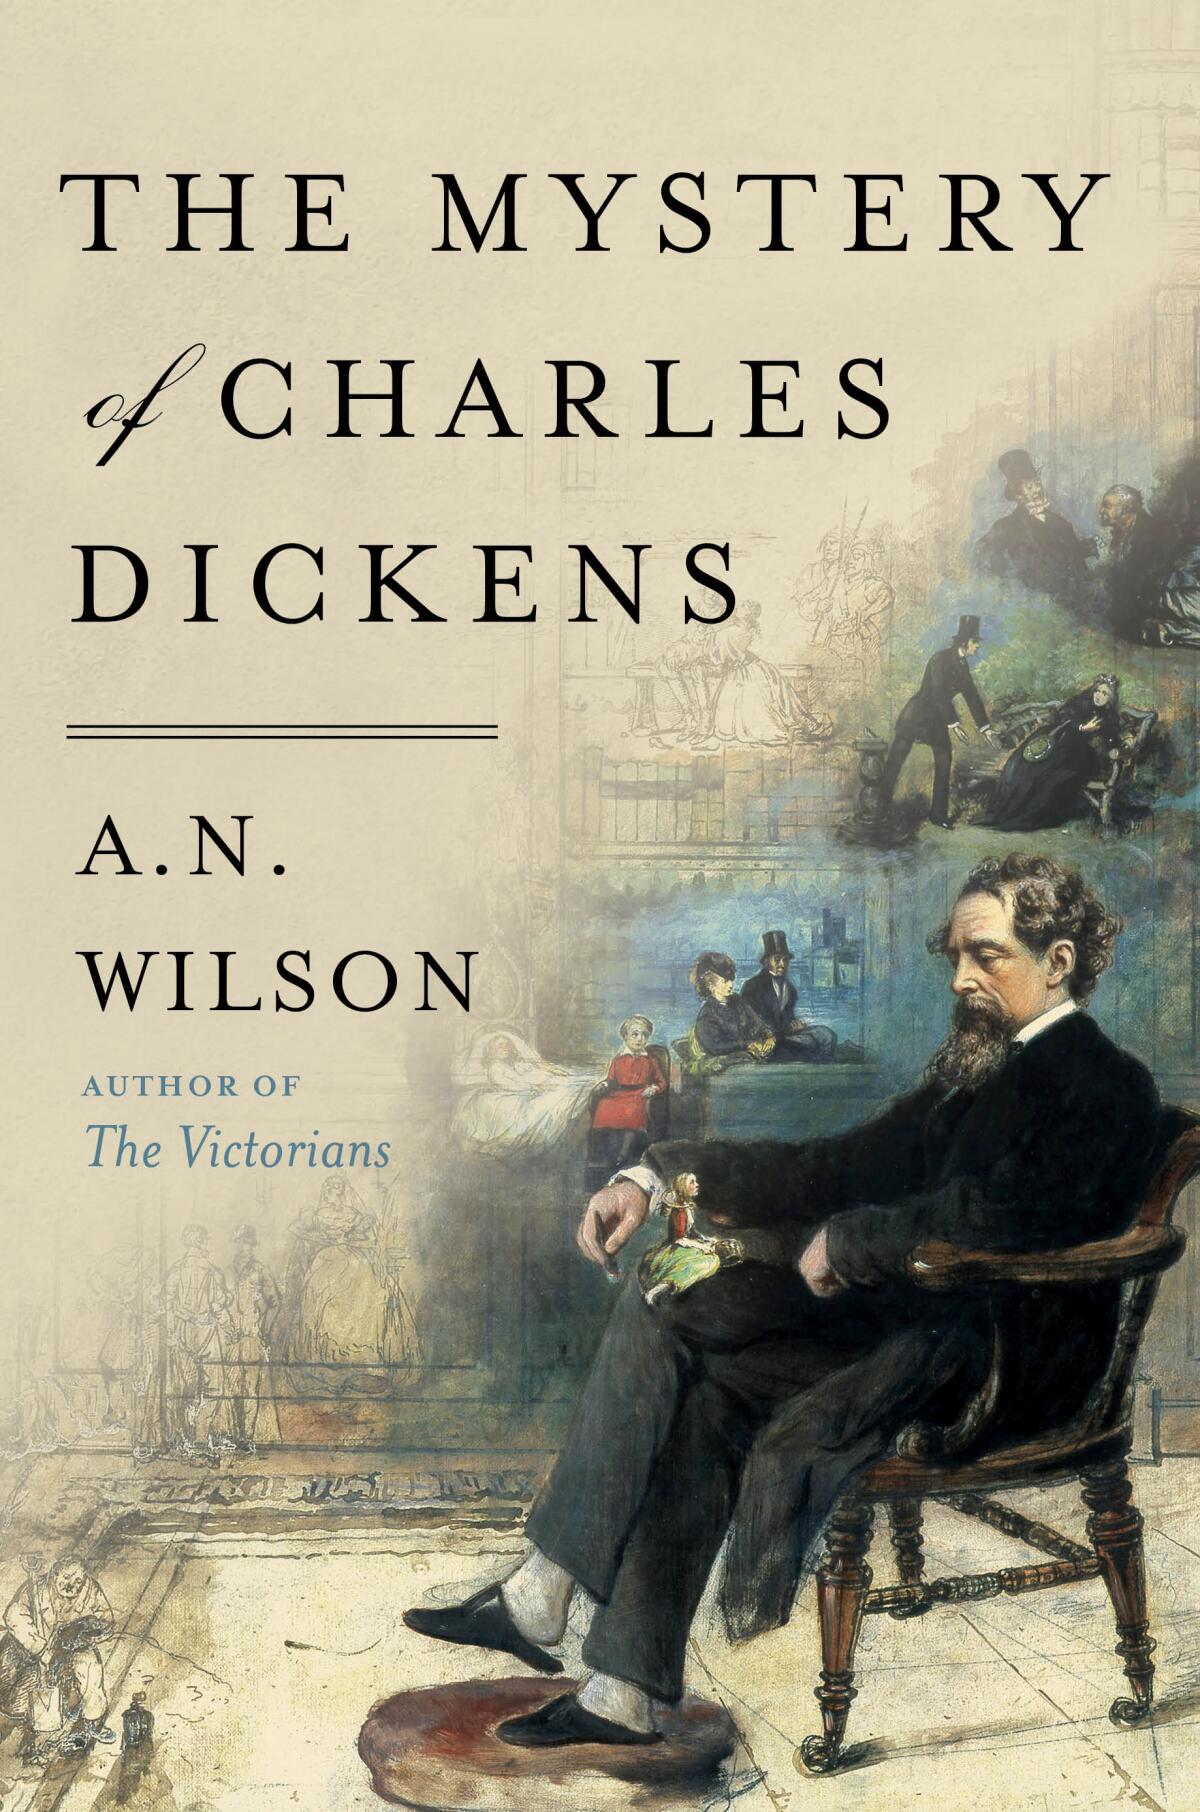 A book jacket for "The Mystery of Charles Dickens," by A.N. Wilson.